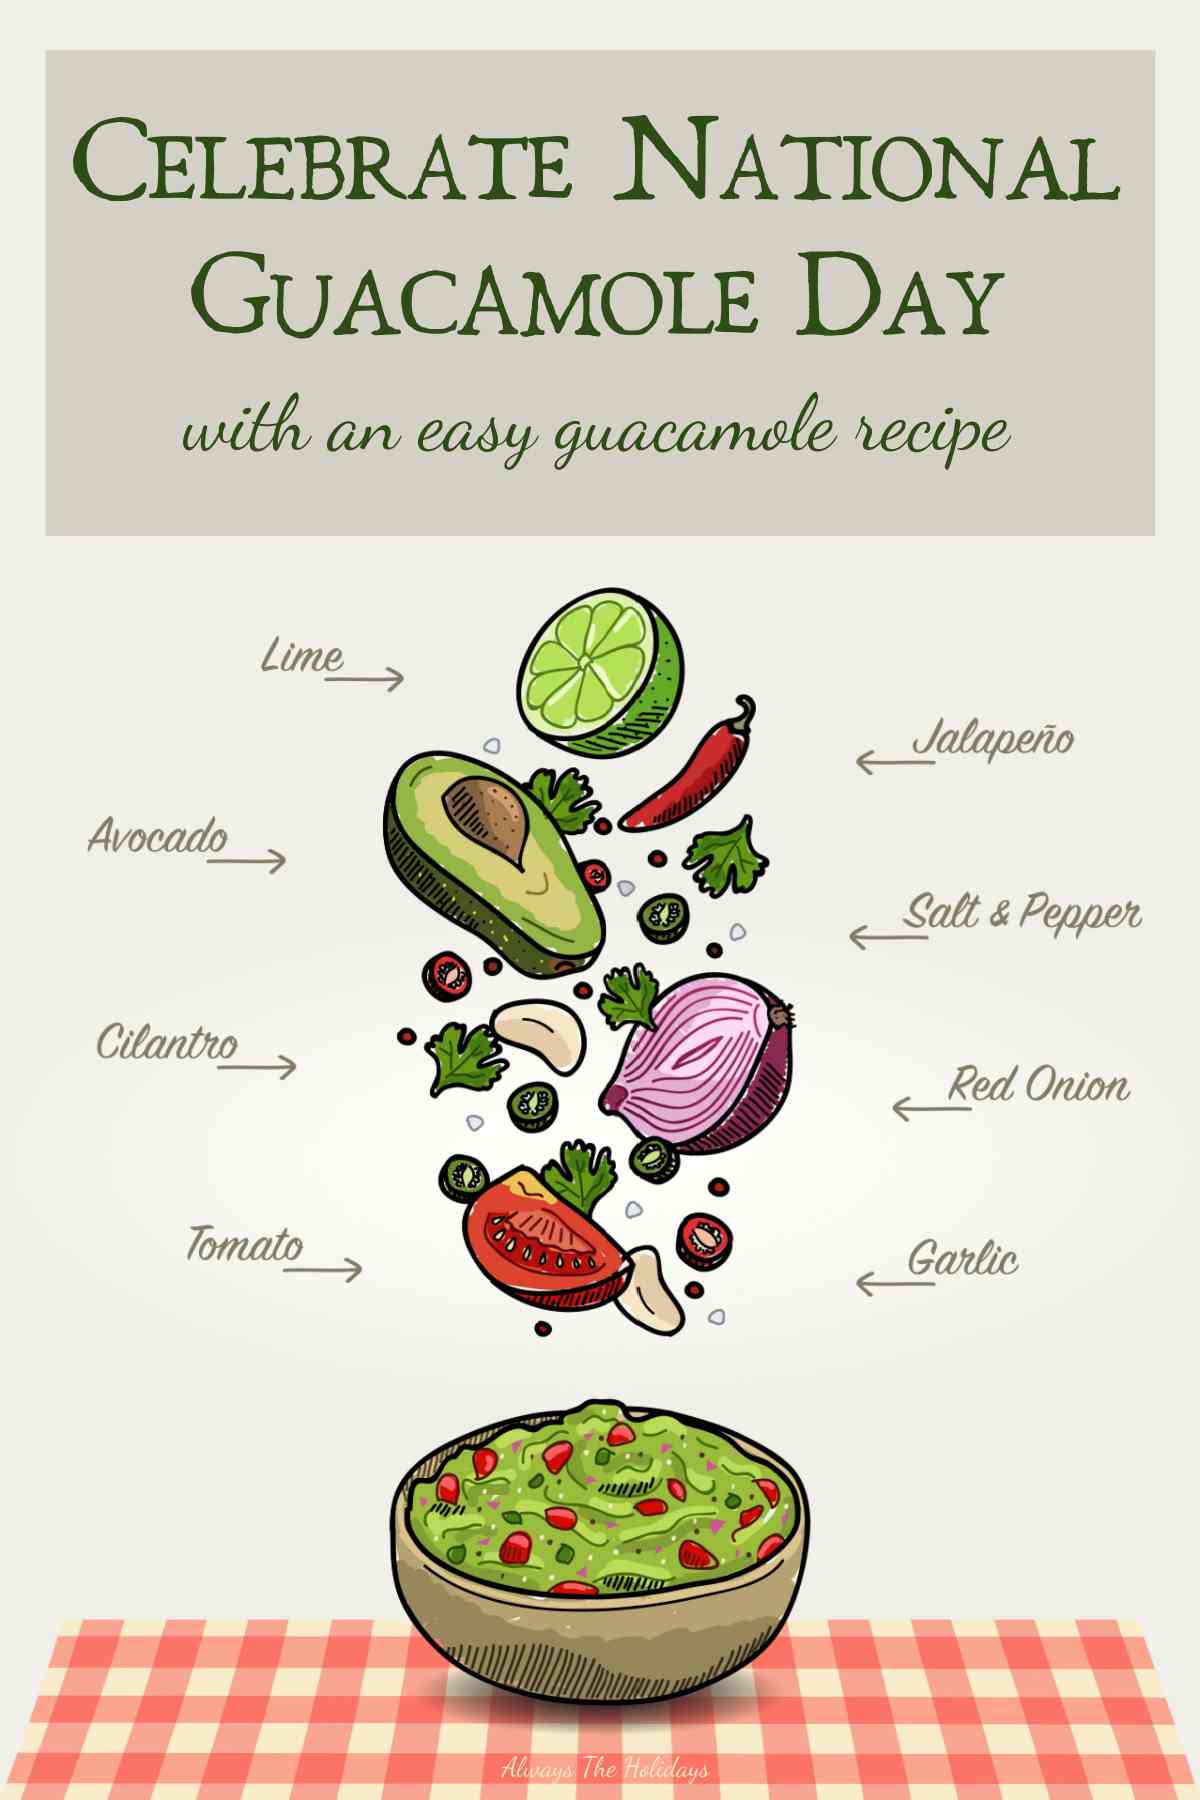 A cartoon image of guacamole ingredients, each of which are labeled, hovering above a bowl of homemade guacamole with a text overlay above it that reads "Celebrate National Guacamole Day with an easy guacamole recipe".